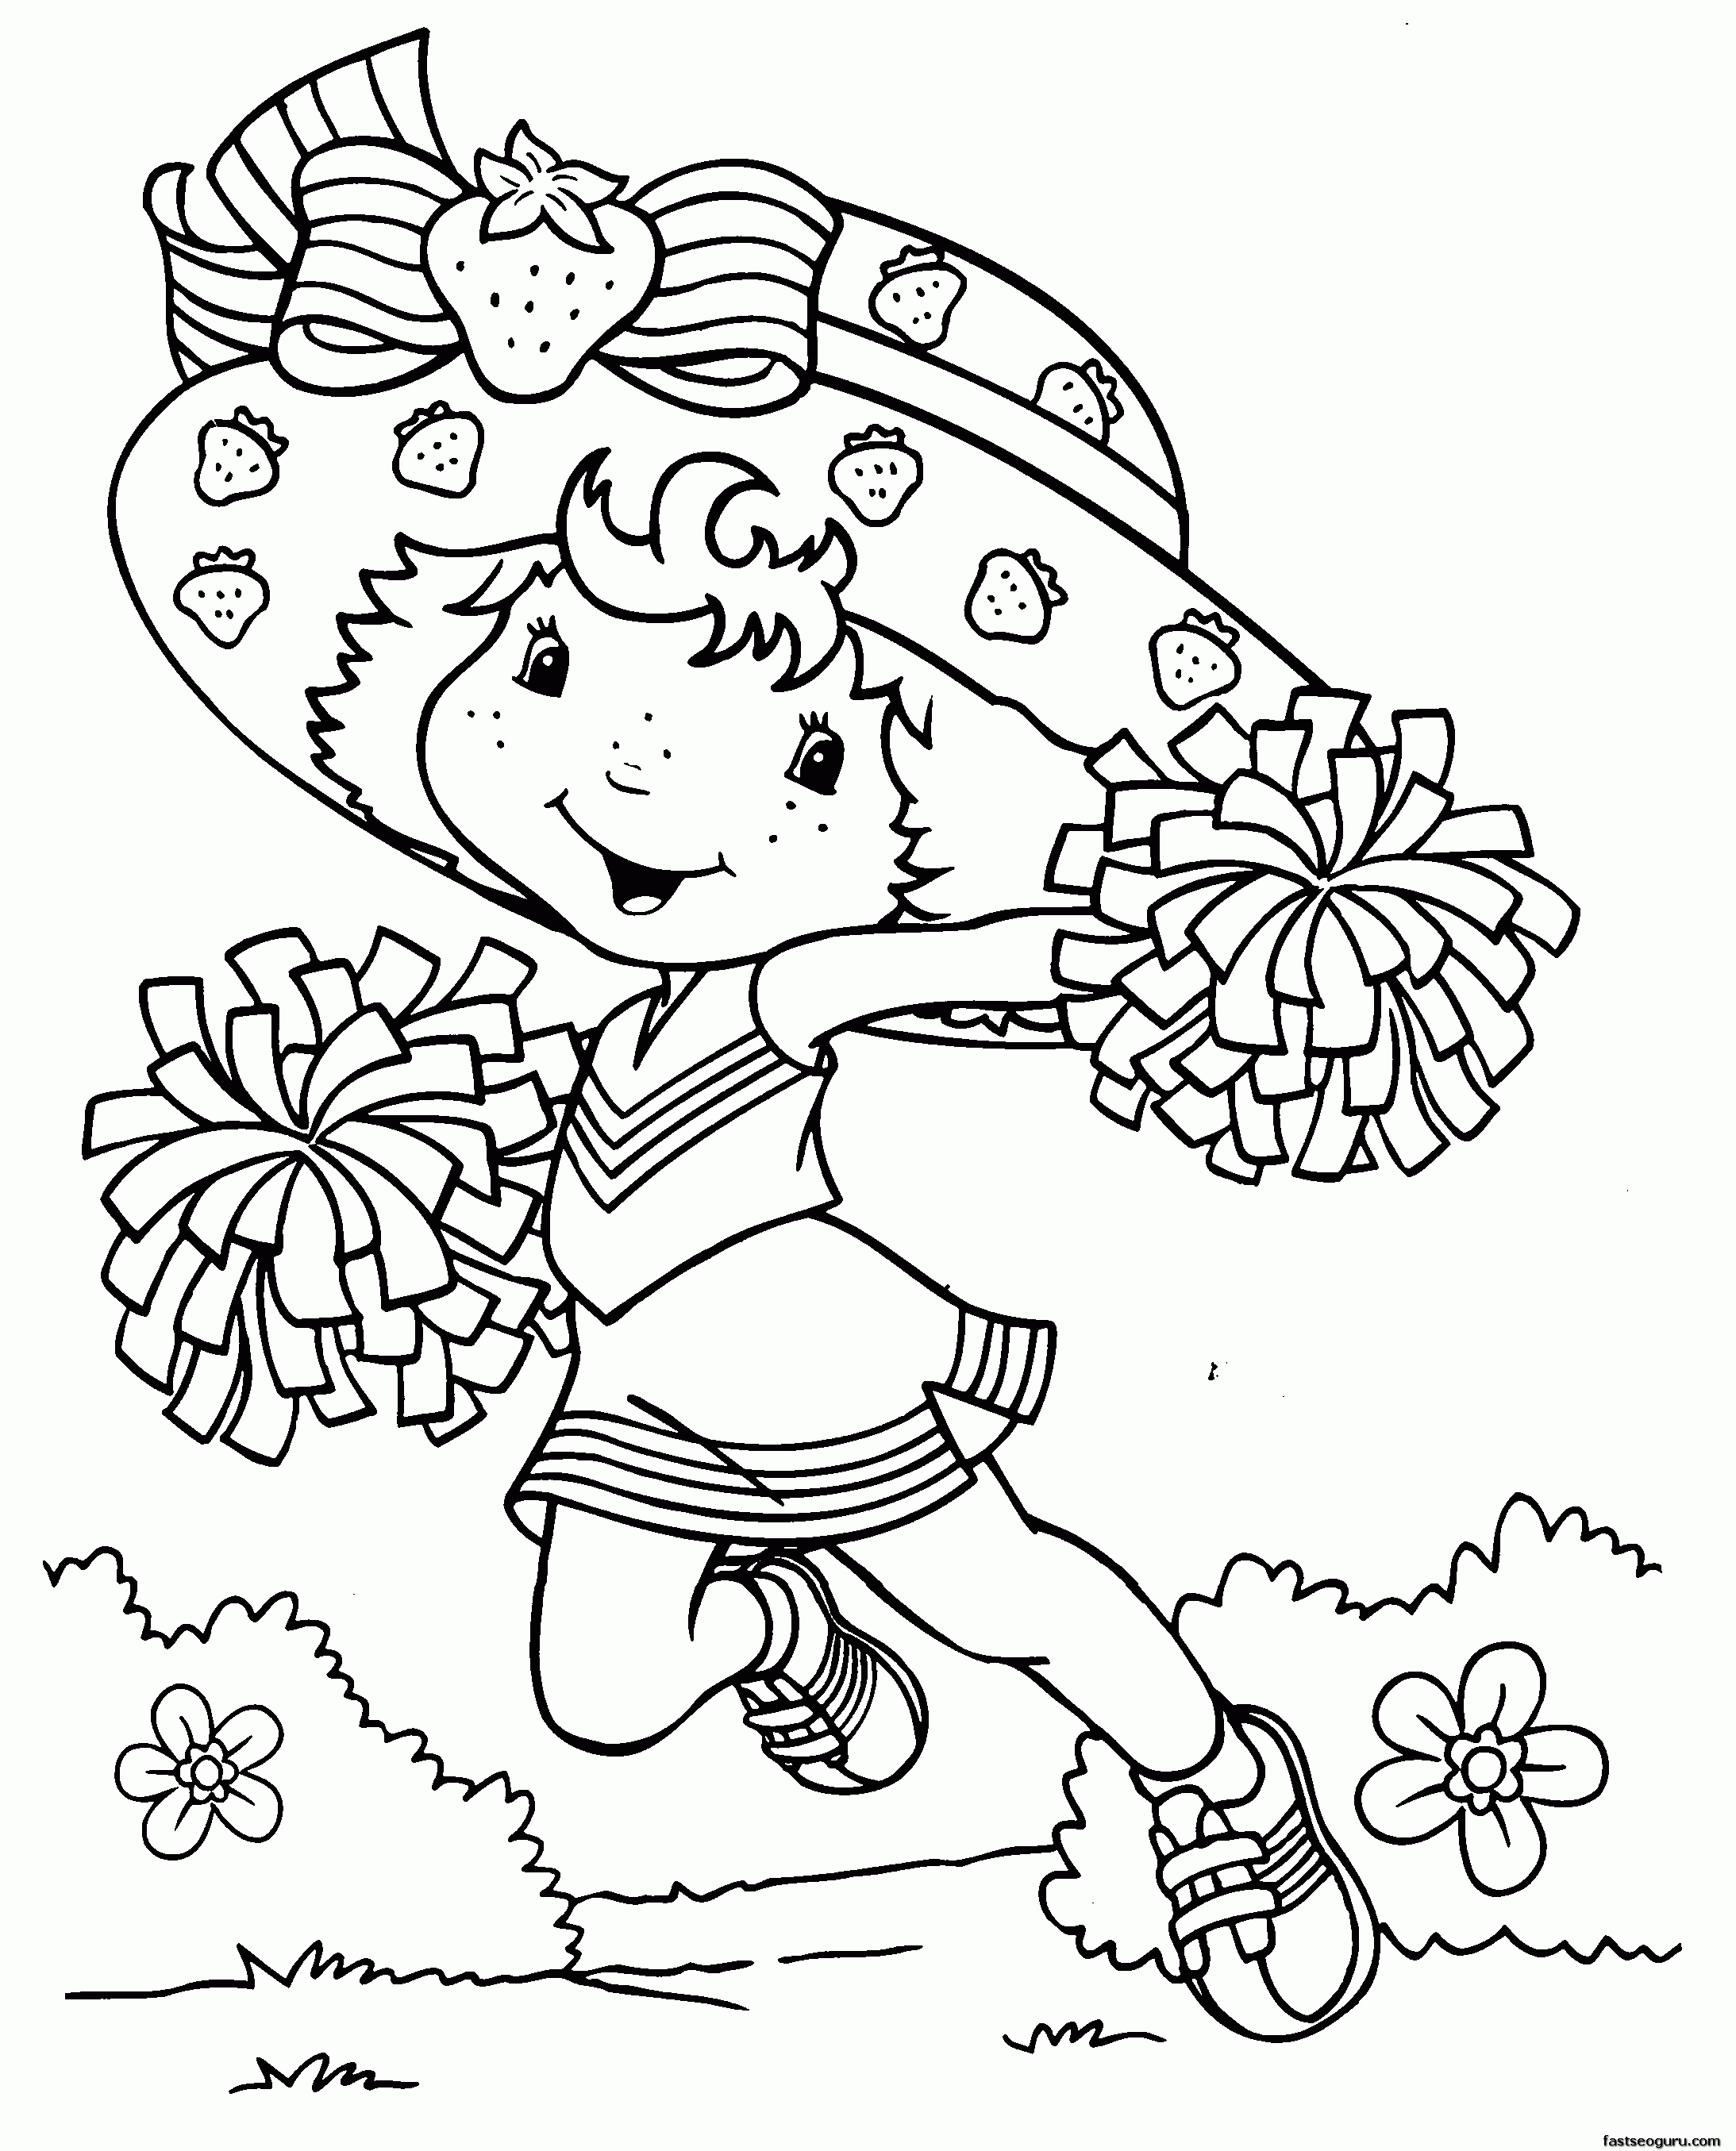 Free Coloring Pages For Girls Cute Image 7 - VoteForVerde.com